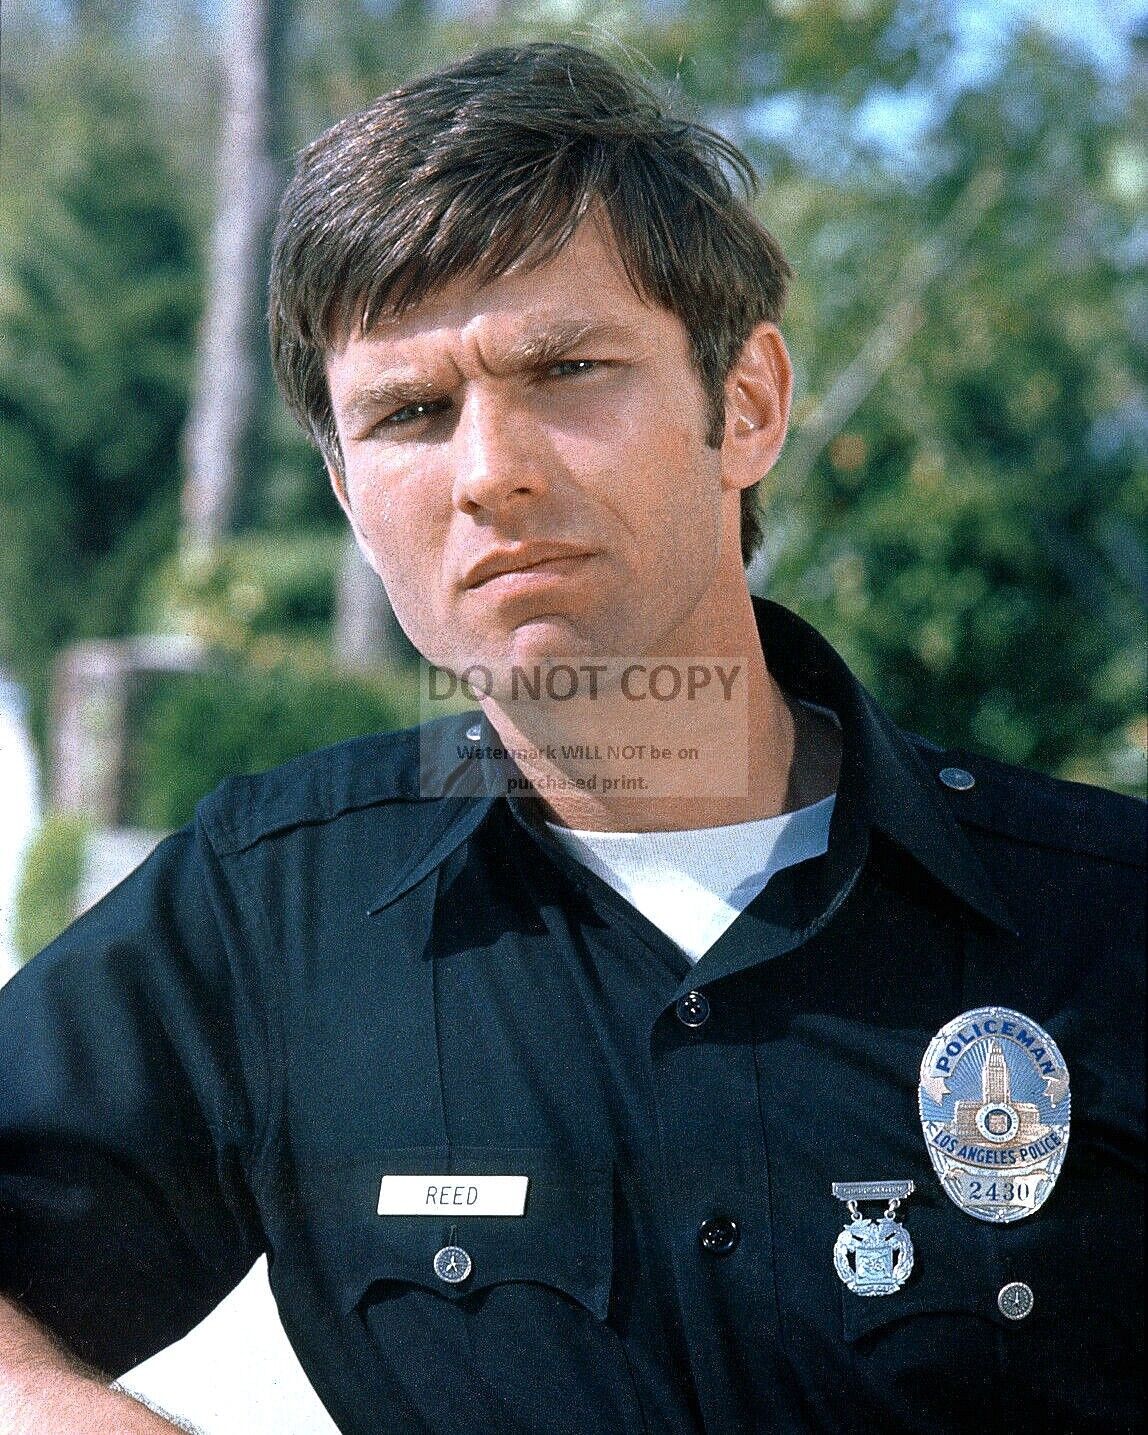 KENT McCORD AS JIM REED ON TV SHOW \